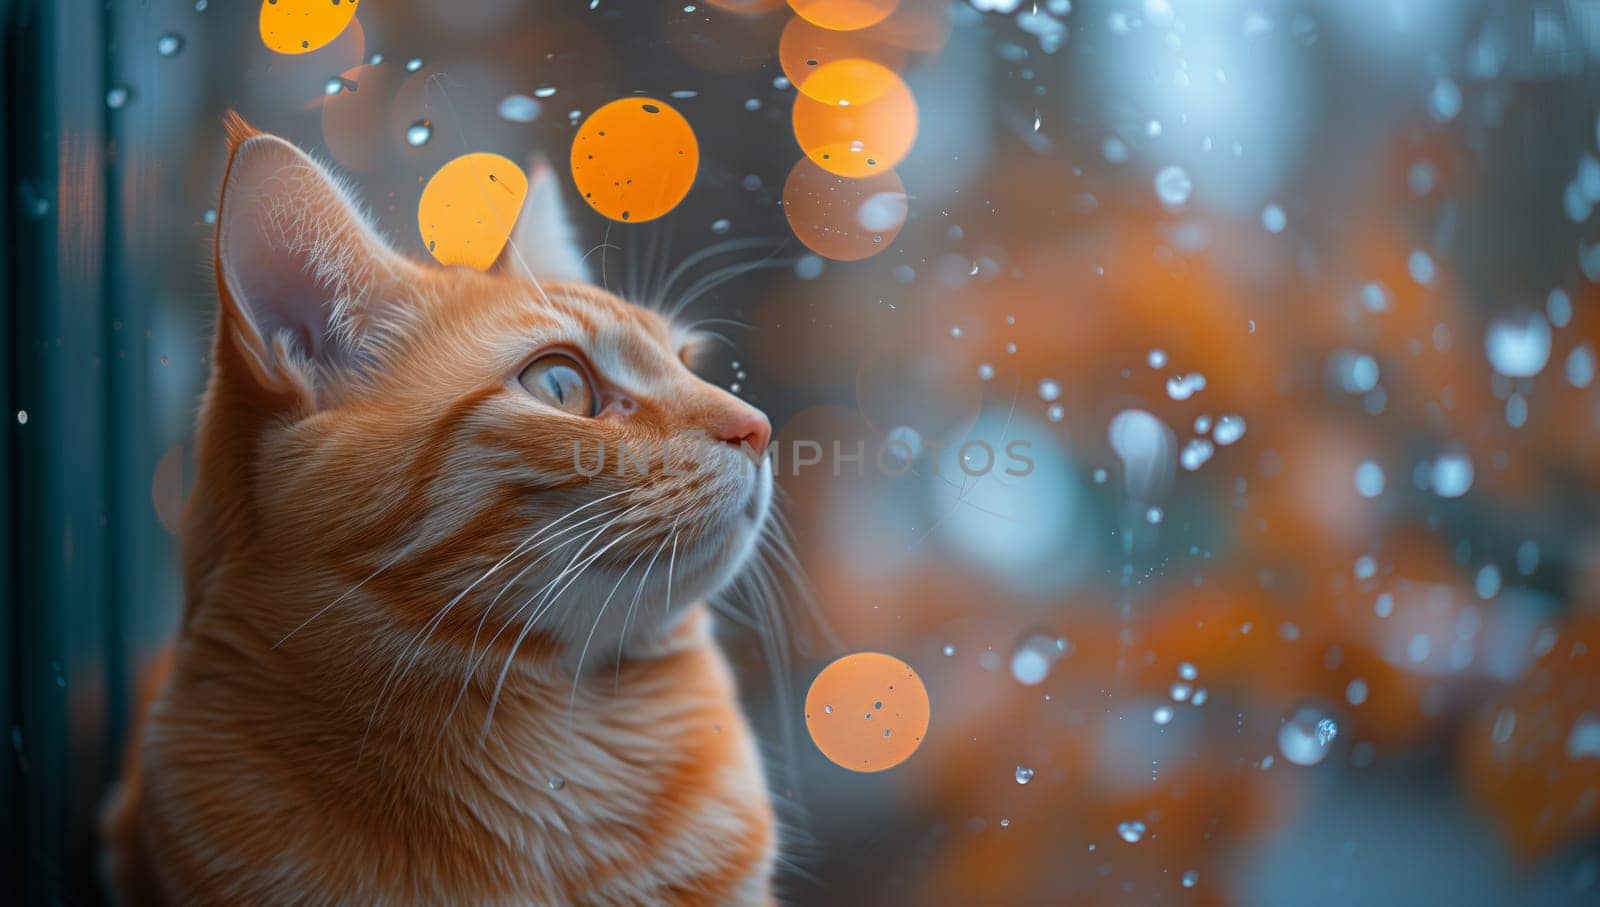 A Felidae carnivore with whiskers and fur, the cat is gazing out of a window at the rain, showcasing its small to mediumsized cat features in a closeup event